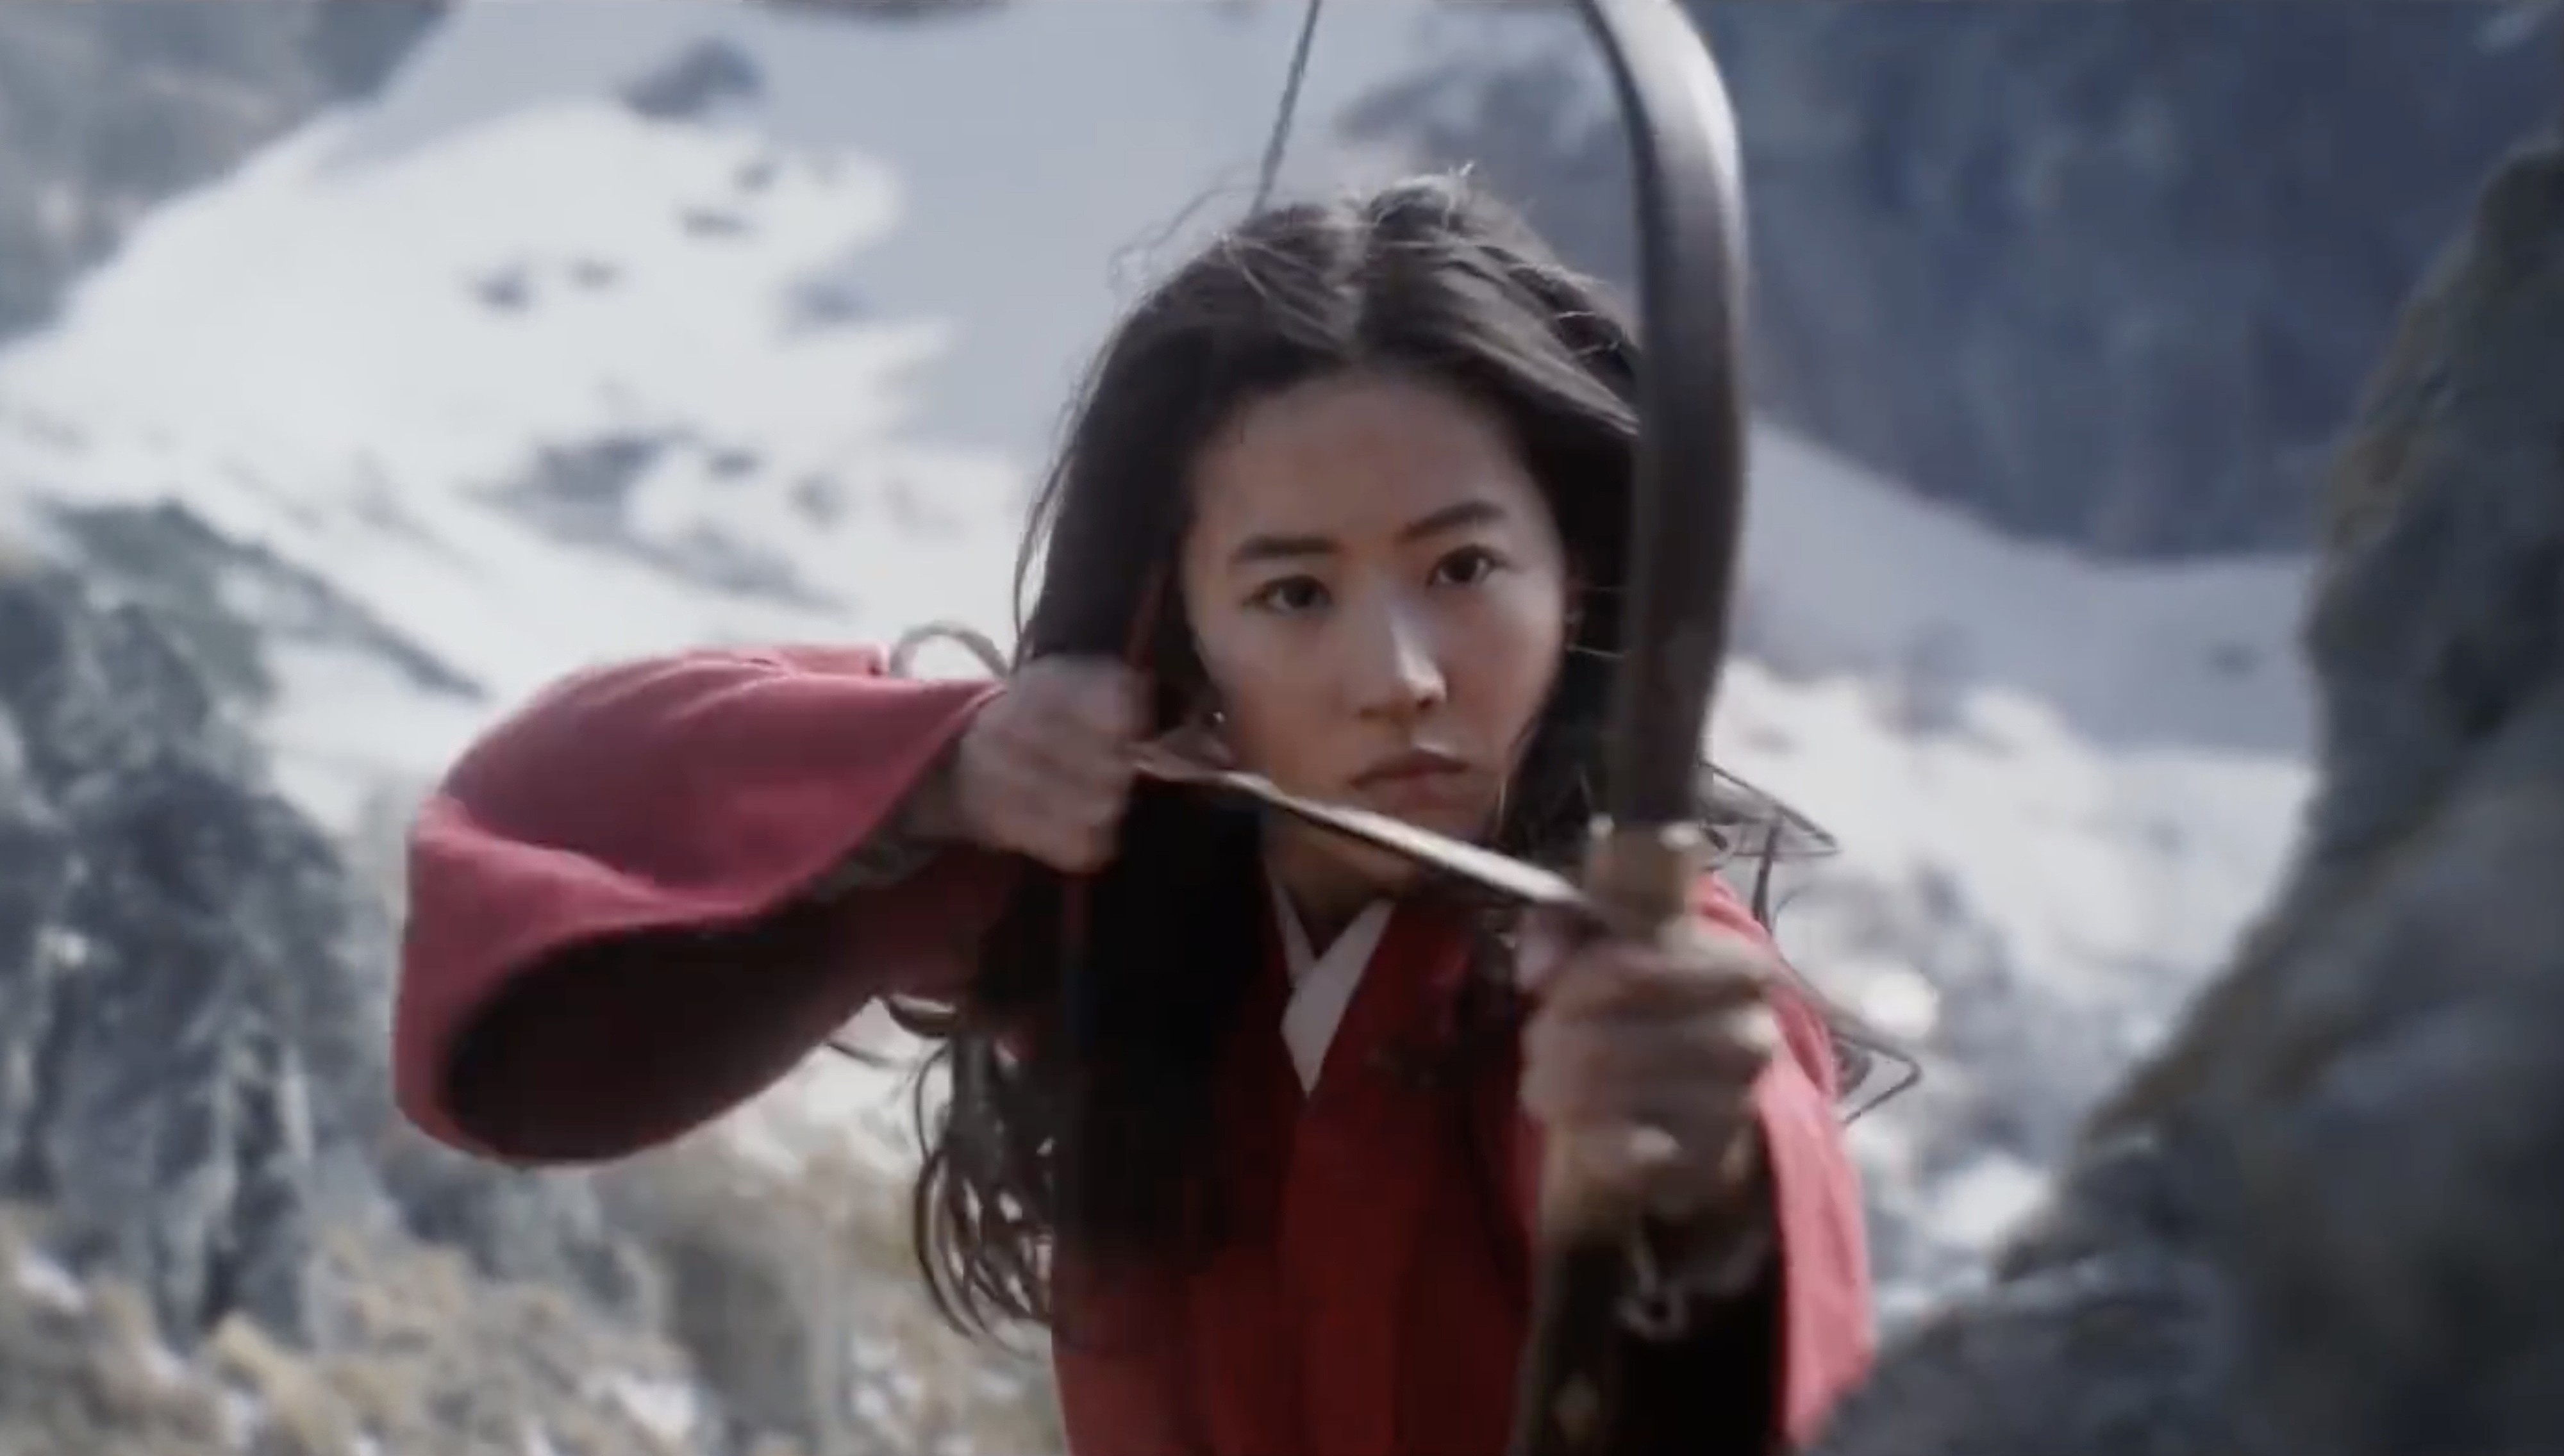 Liu Yifei plays Mulan in the live-action film of the same name, but what other female kung fu masters are out there? Photo: Disney